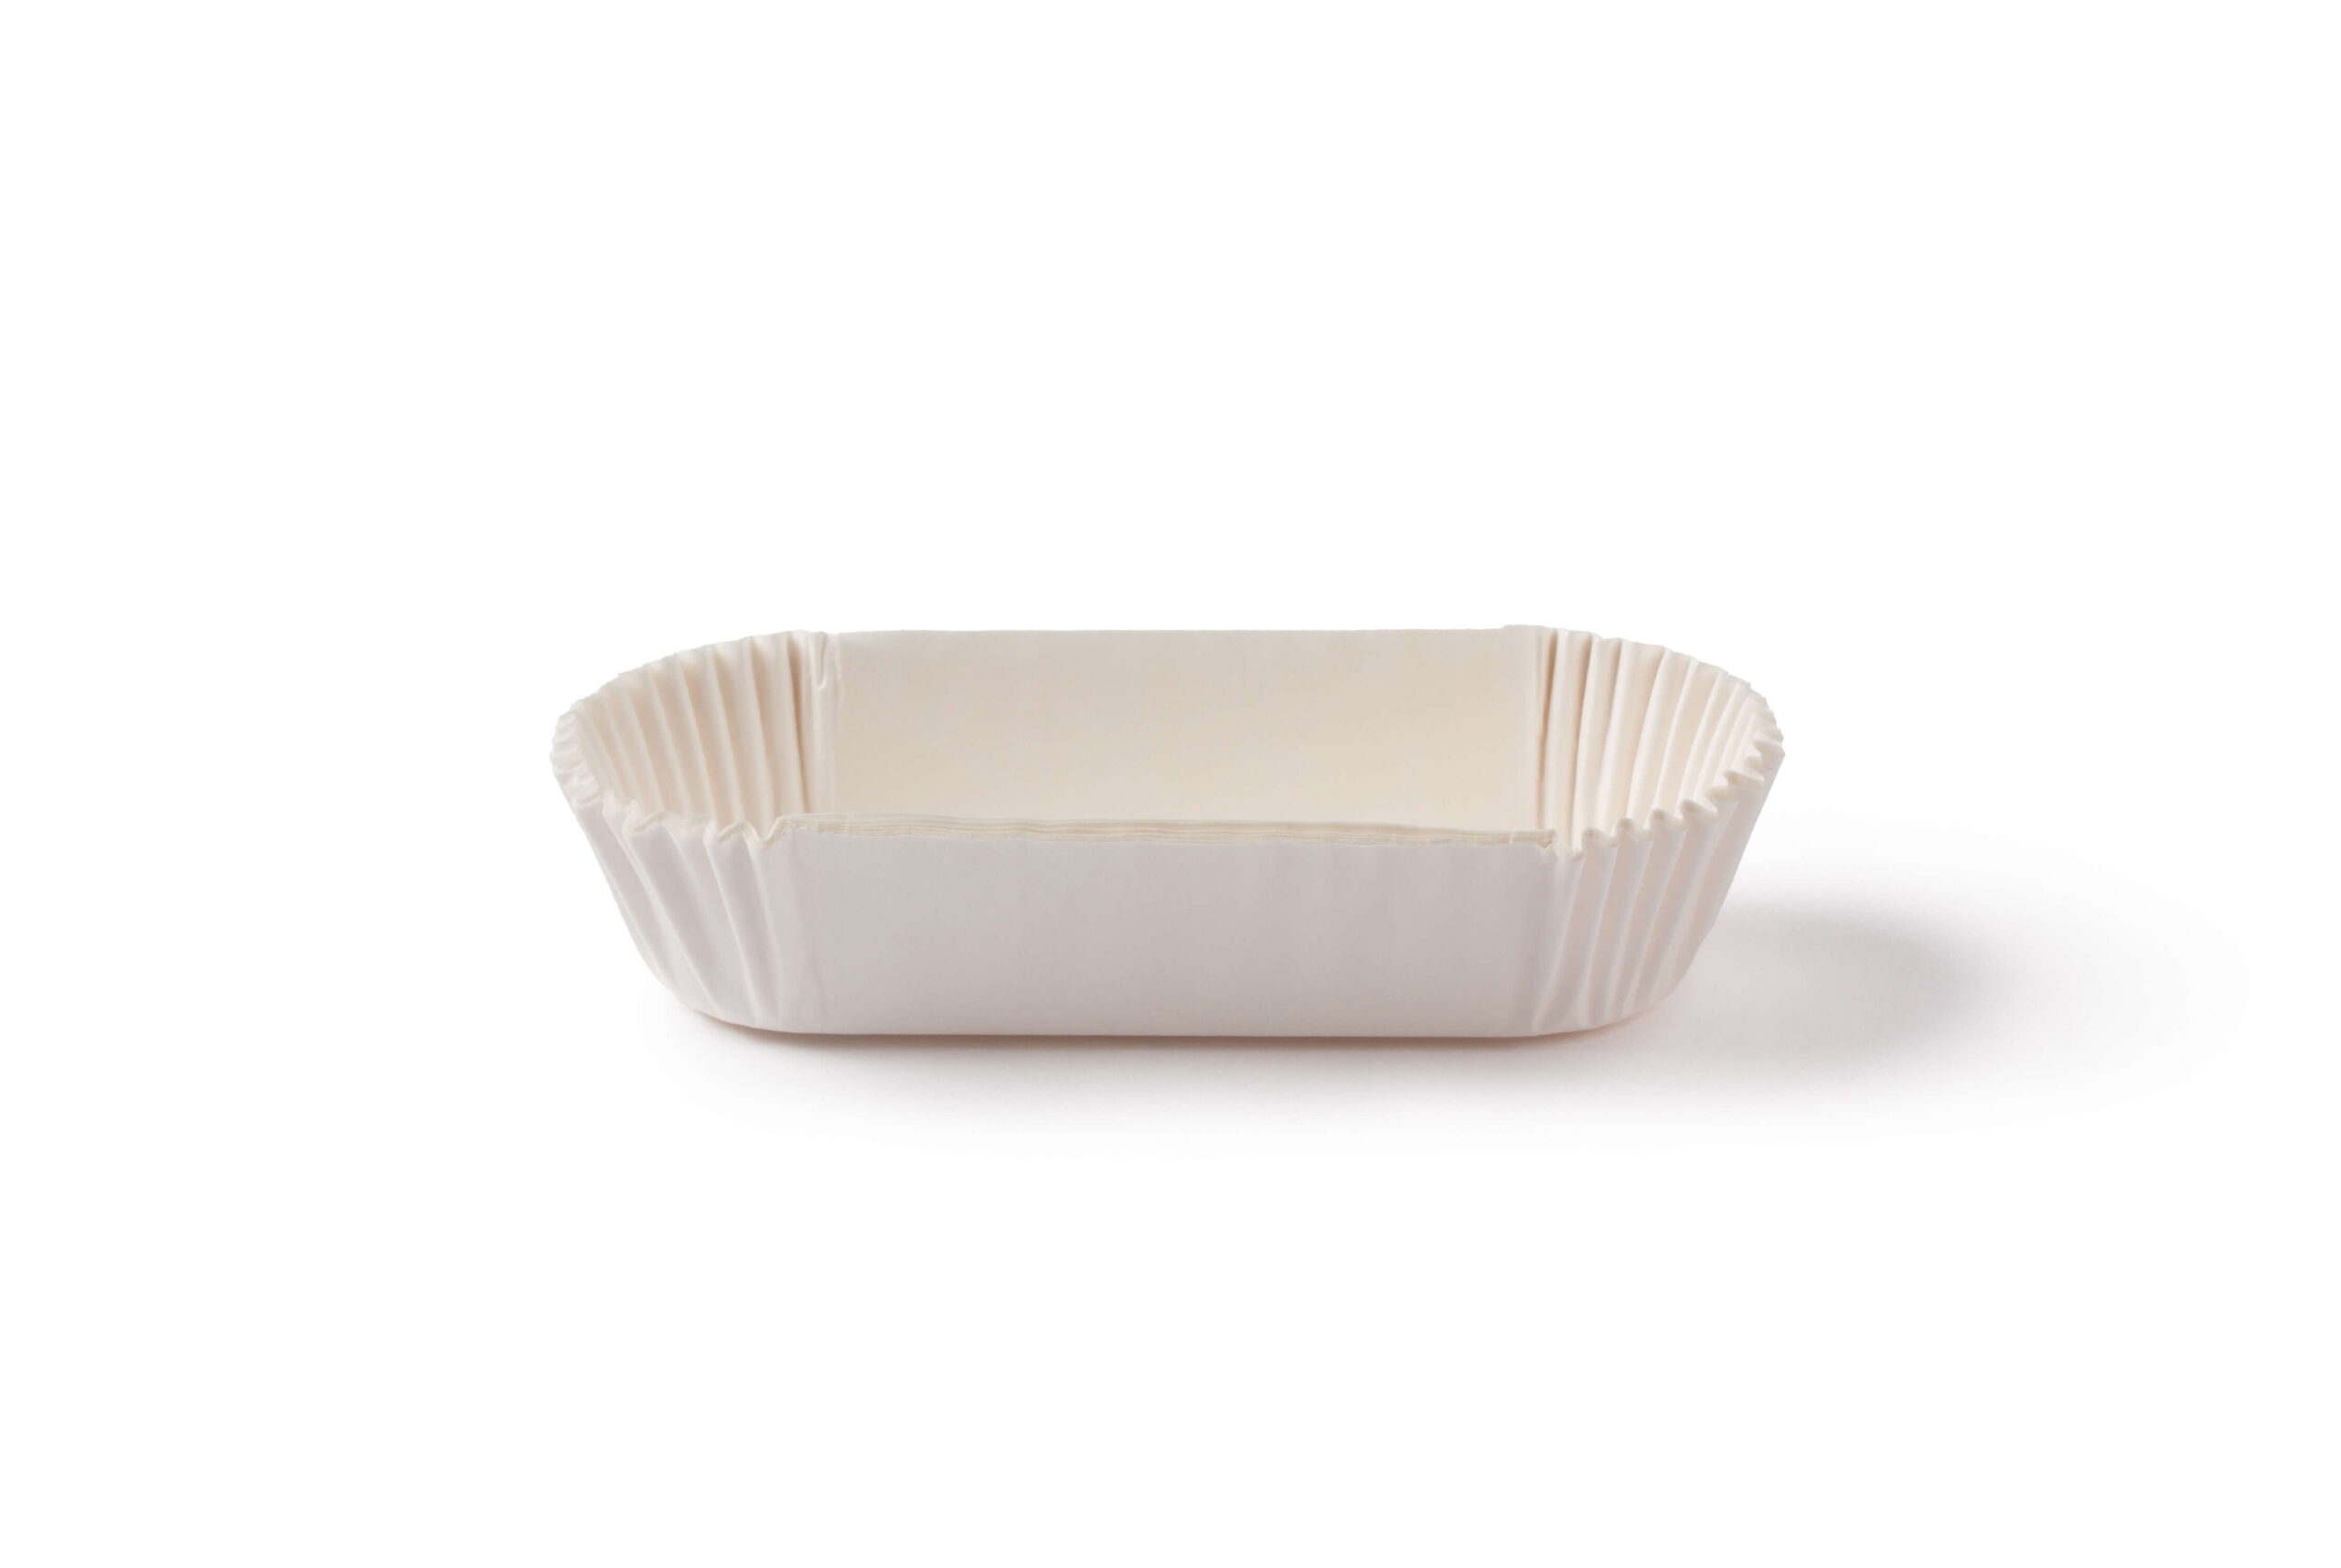 Standard baking cups for bakery & pastry - Greaseproof 95g